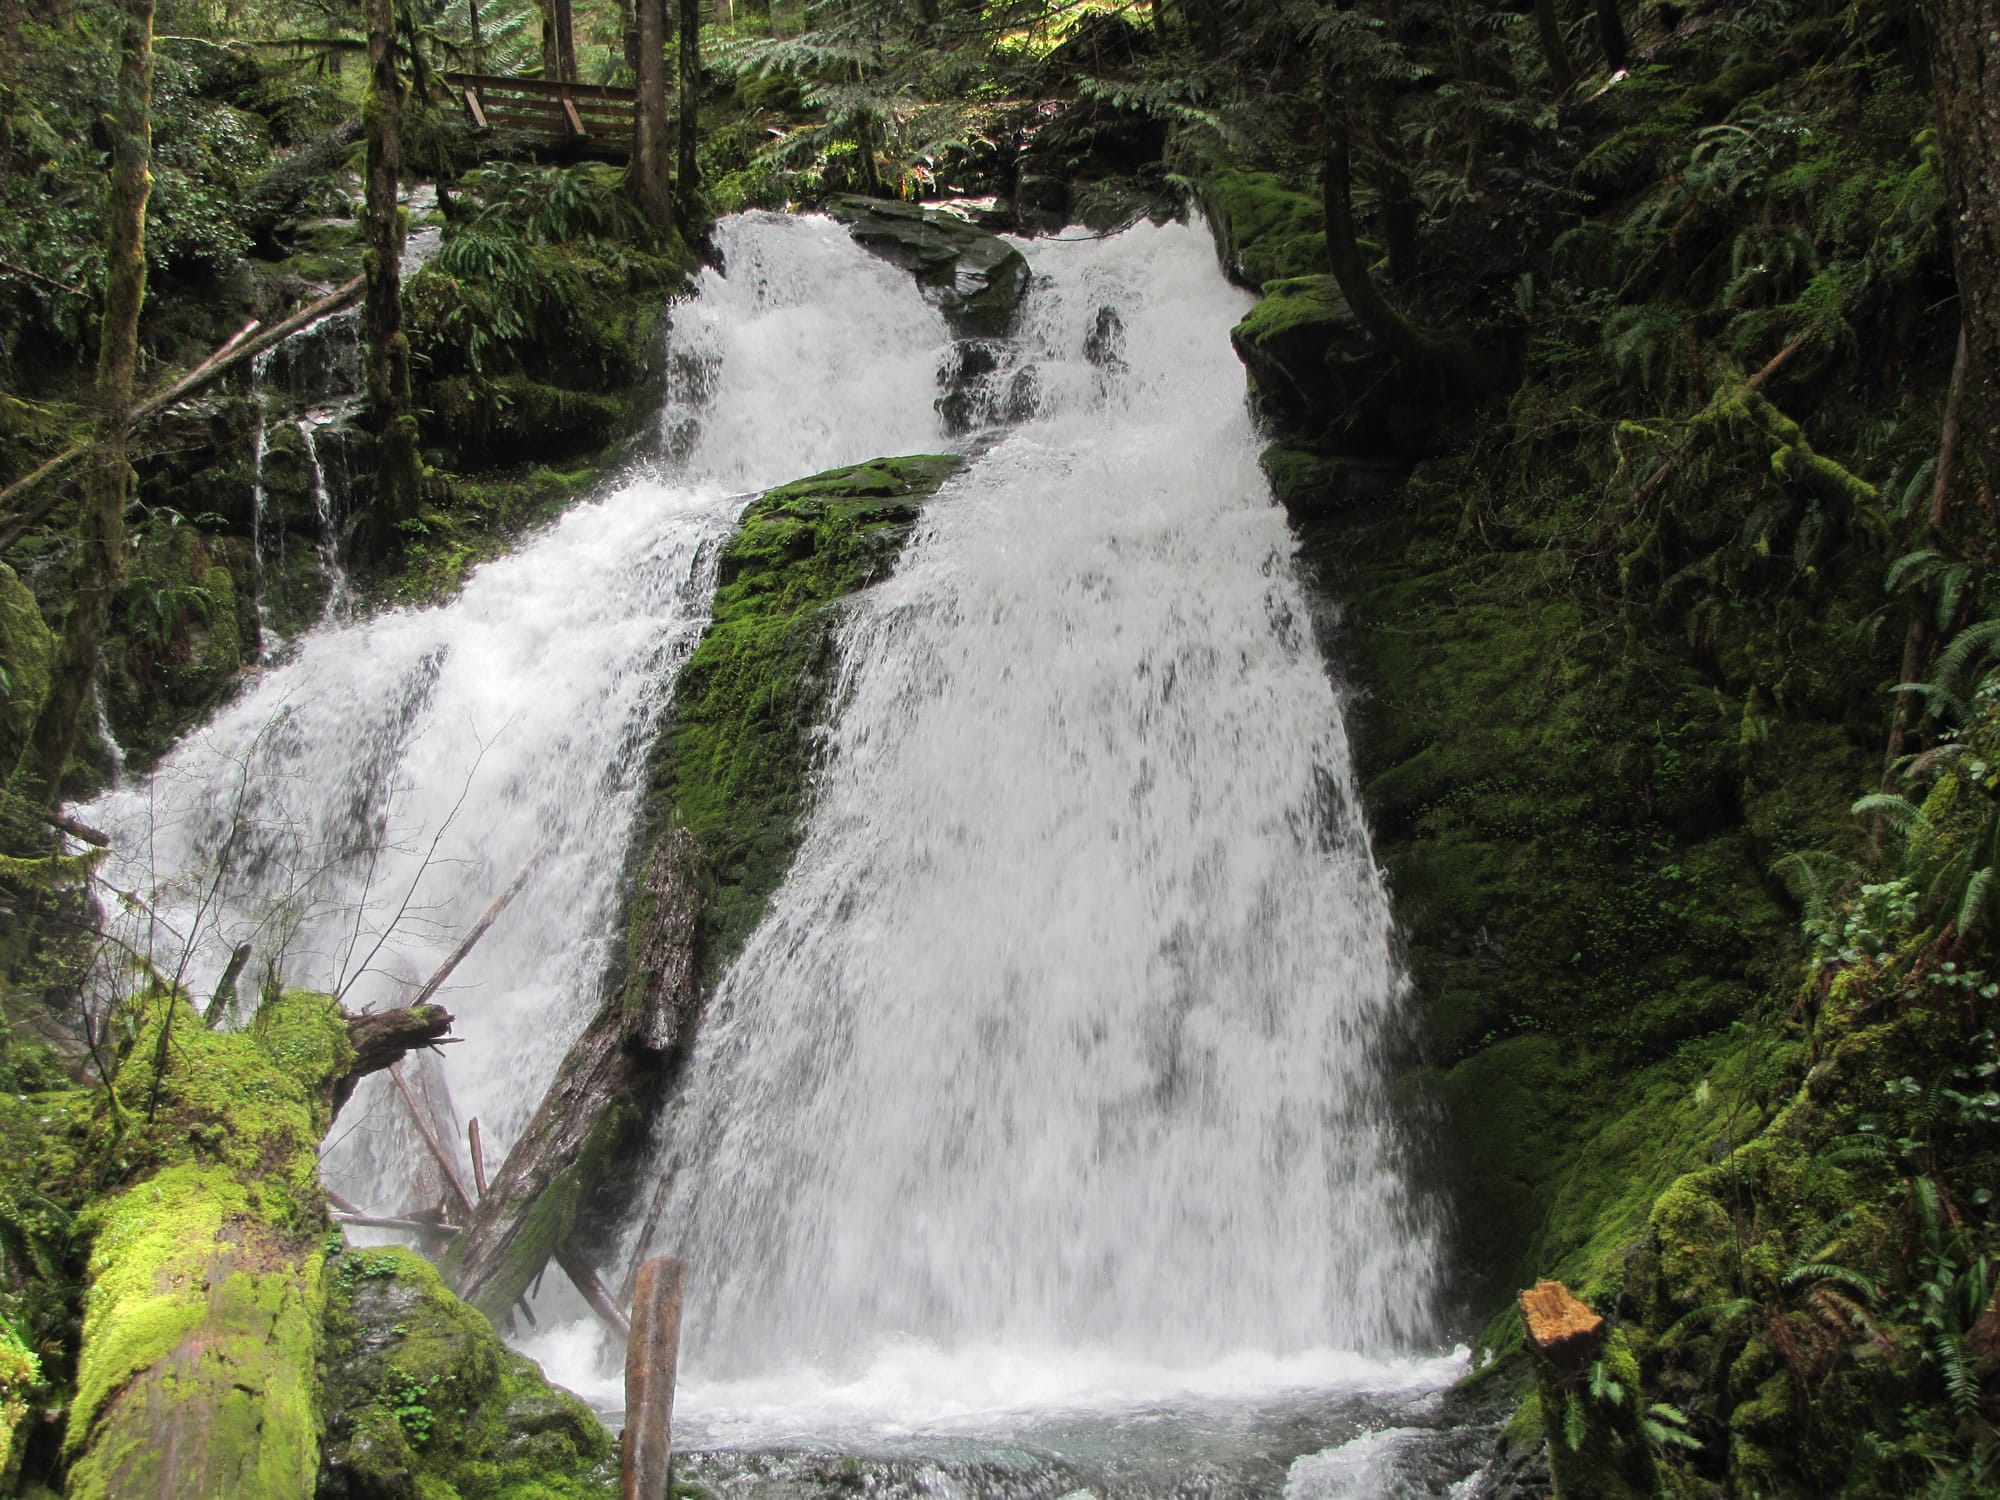 Horseshoe Creek Falls are about 1.7 miles east of the trailhead on Siouxon trail No. 130 in the Gifford Pinchot National Forest.